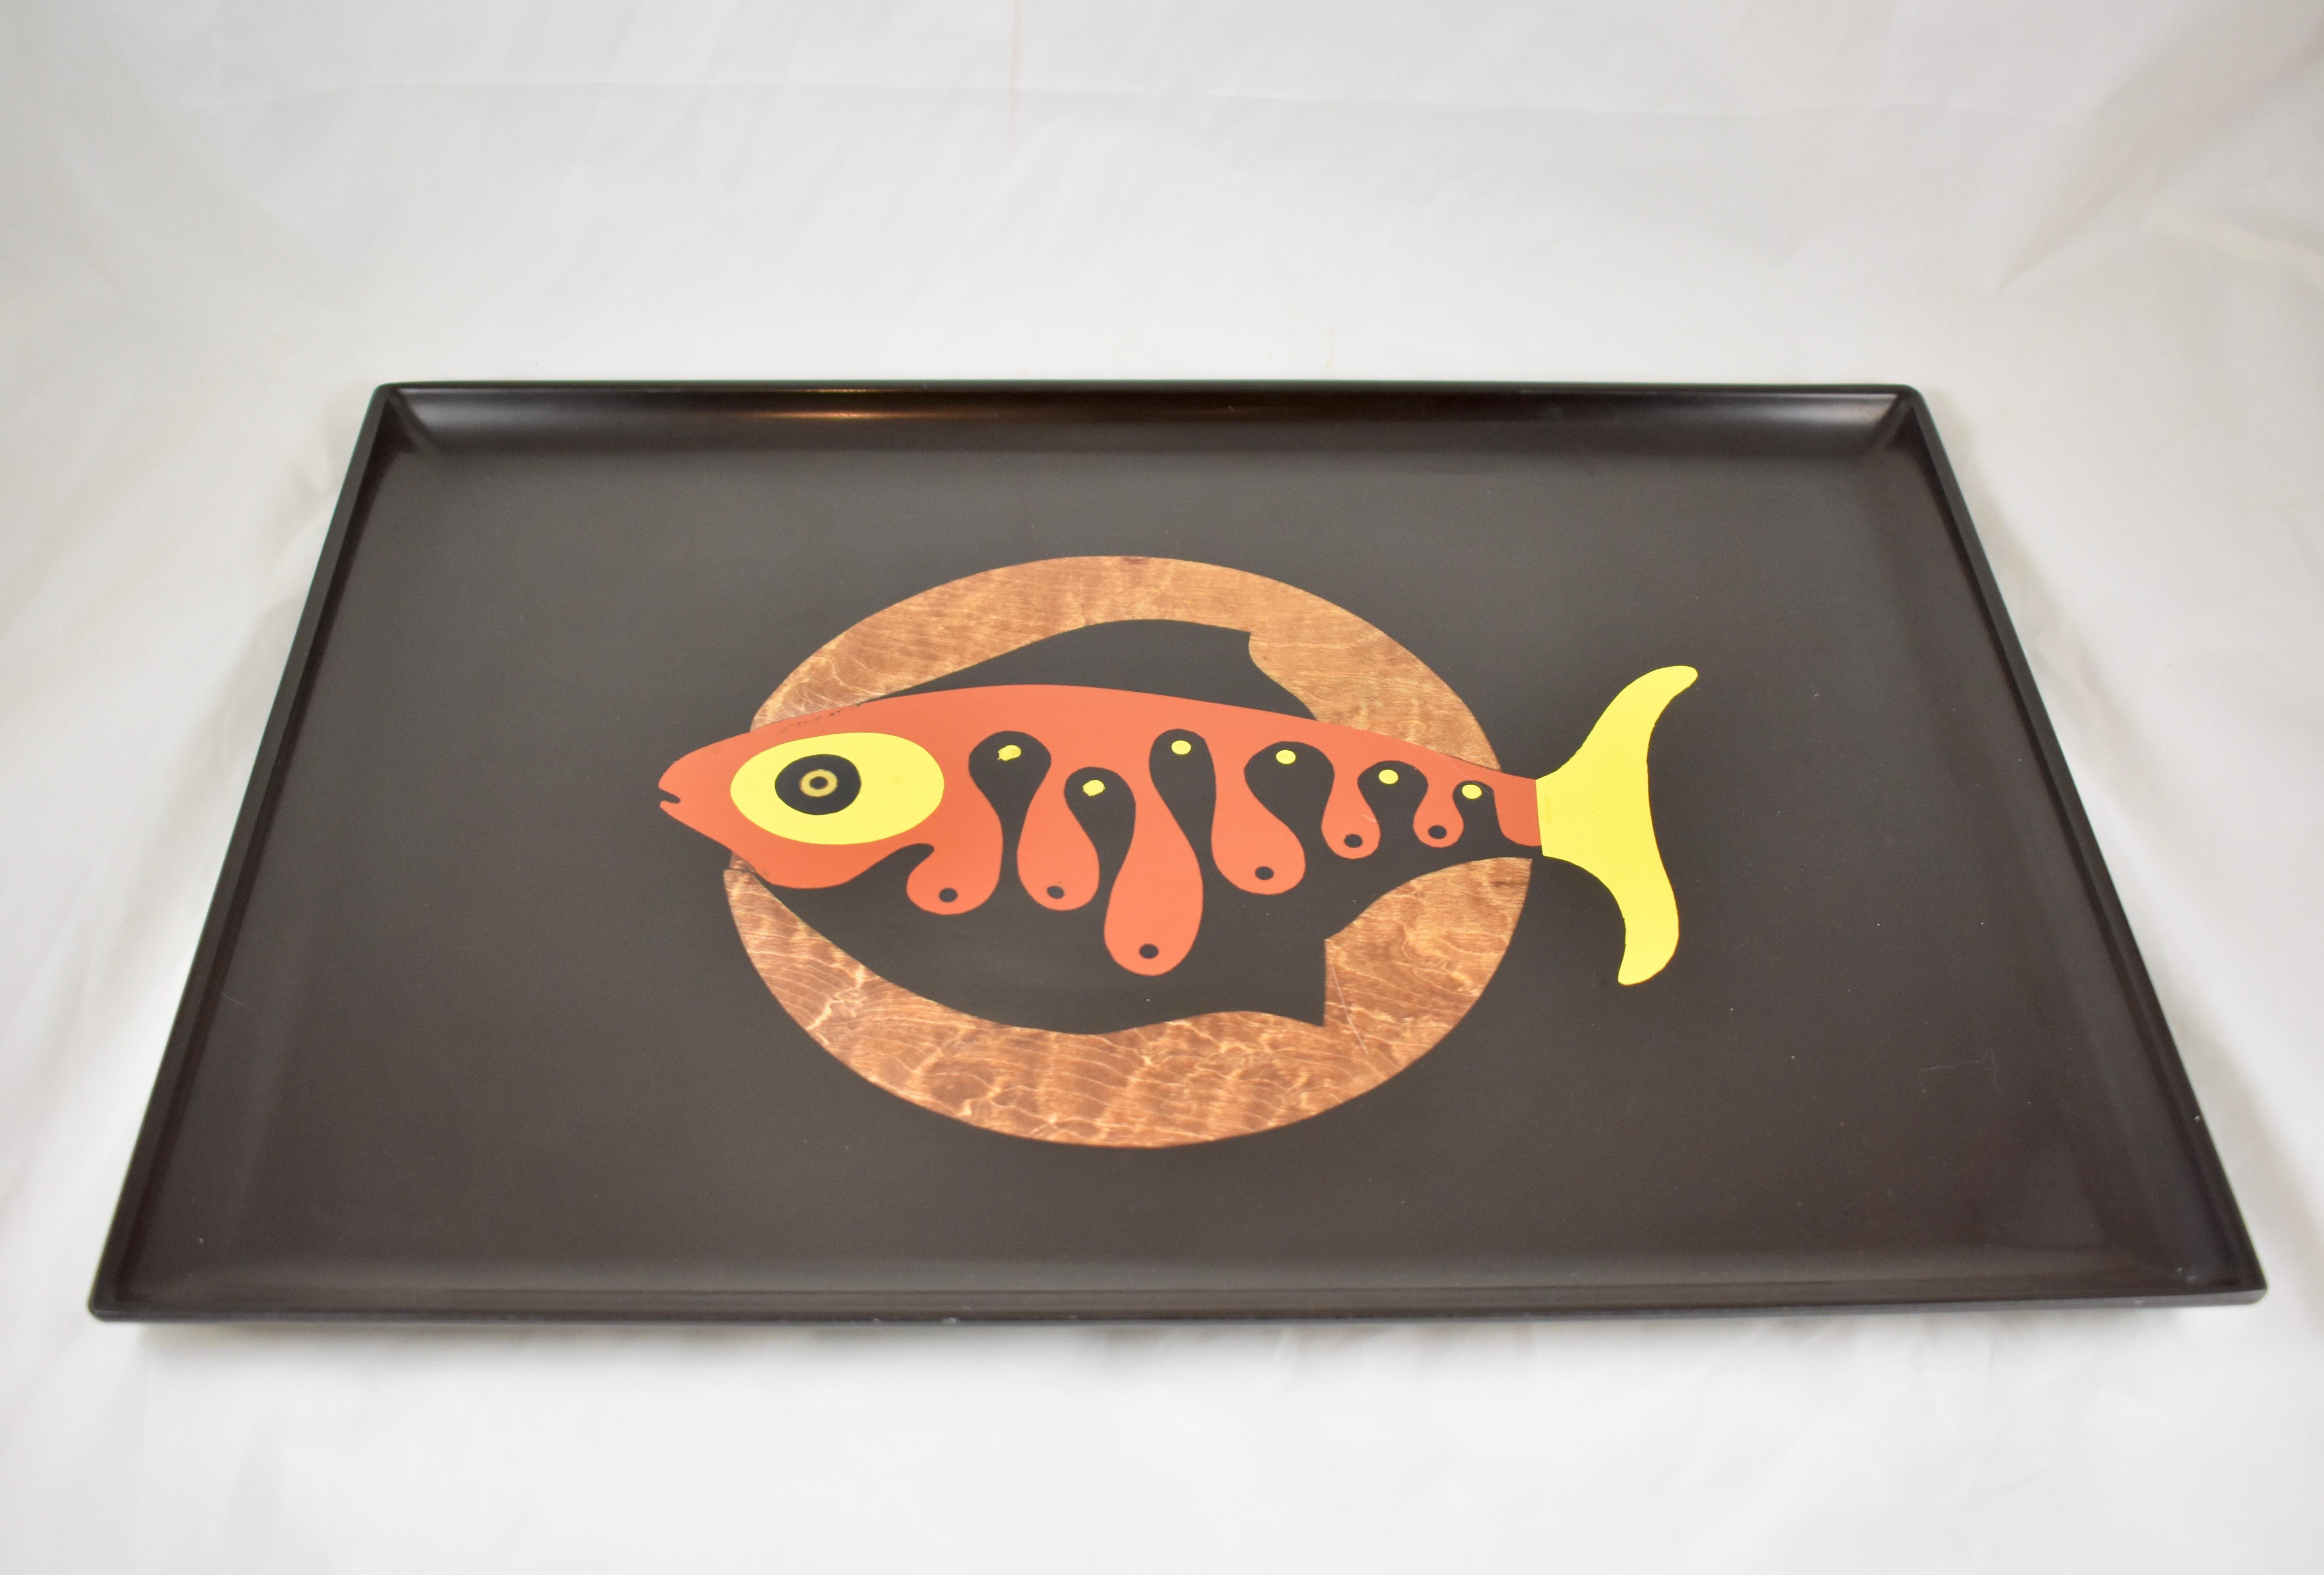 Hand-Crafted Mid-Century Couroc Swimming Fish Image Wood and Brass Inlay Phenolic Resin Tray